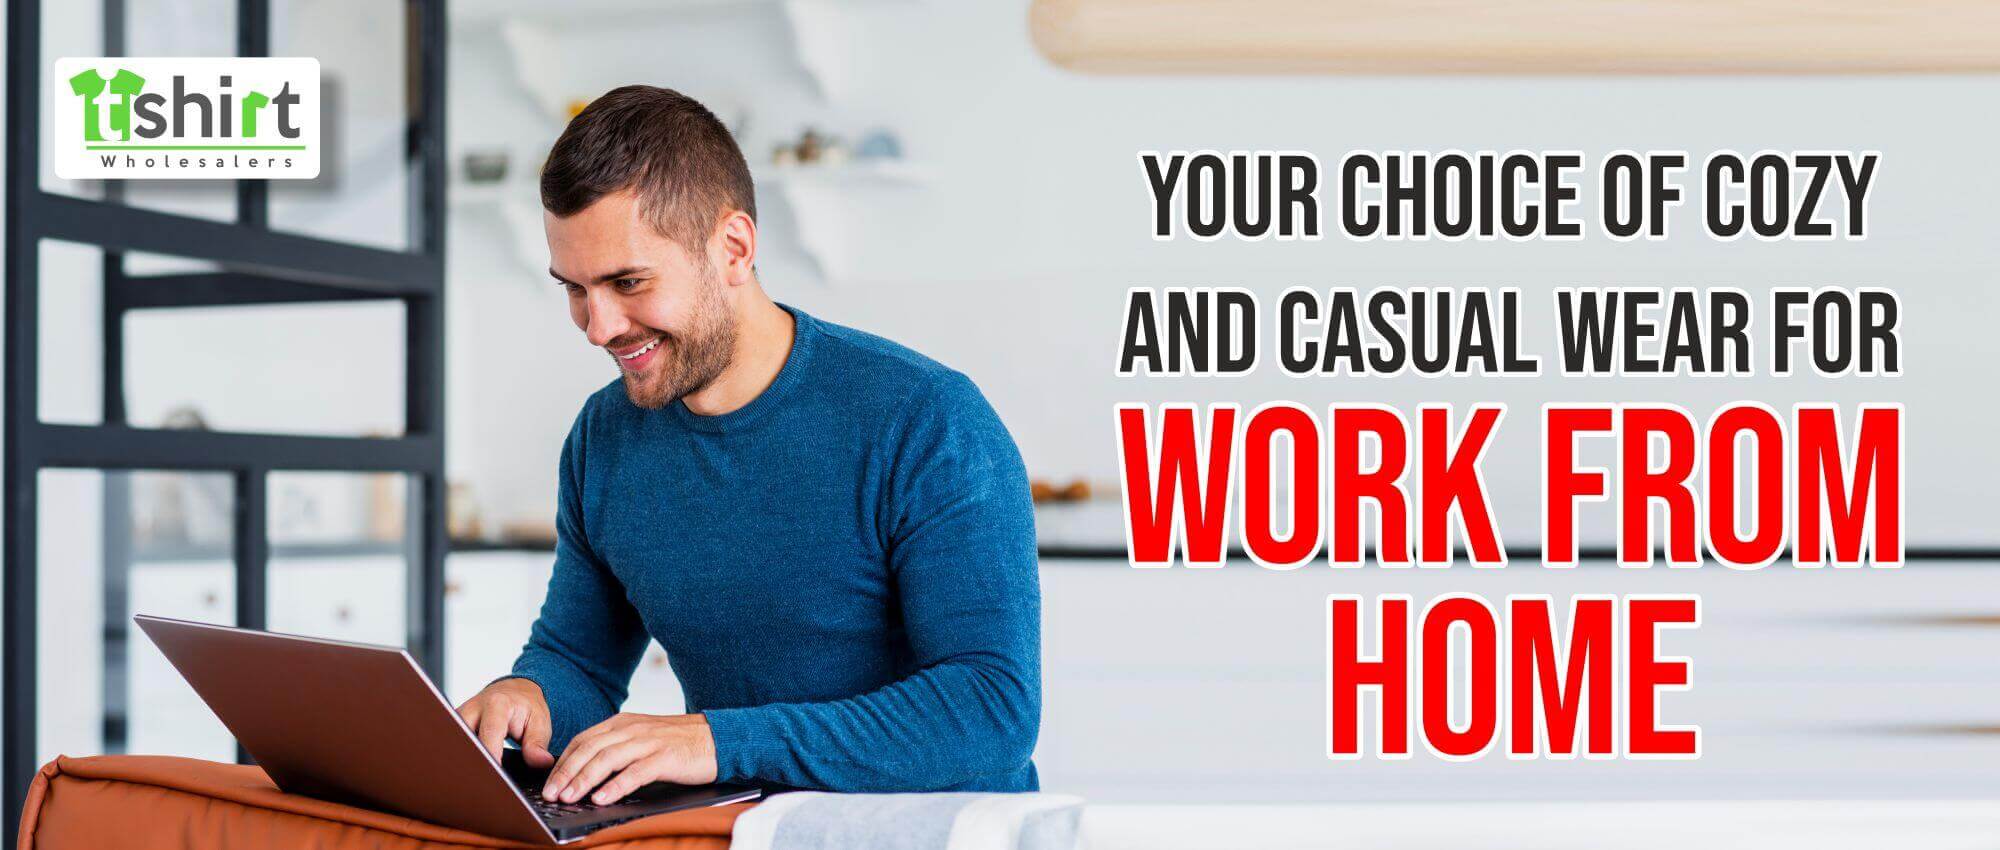 YOUR CHOICE OF COZY AND CASUAL WEAR FOR WORK FROM HOME